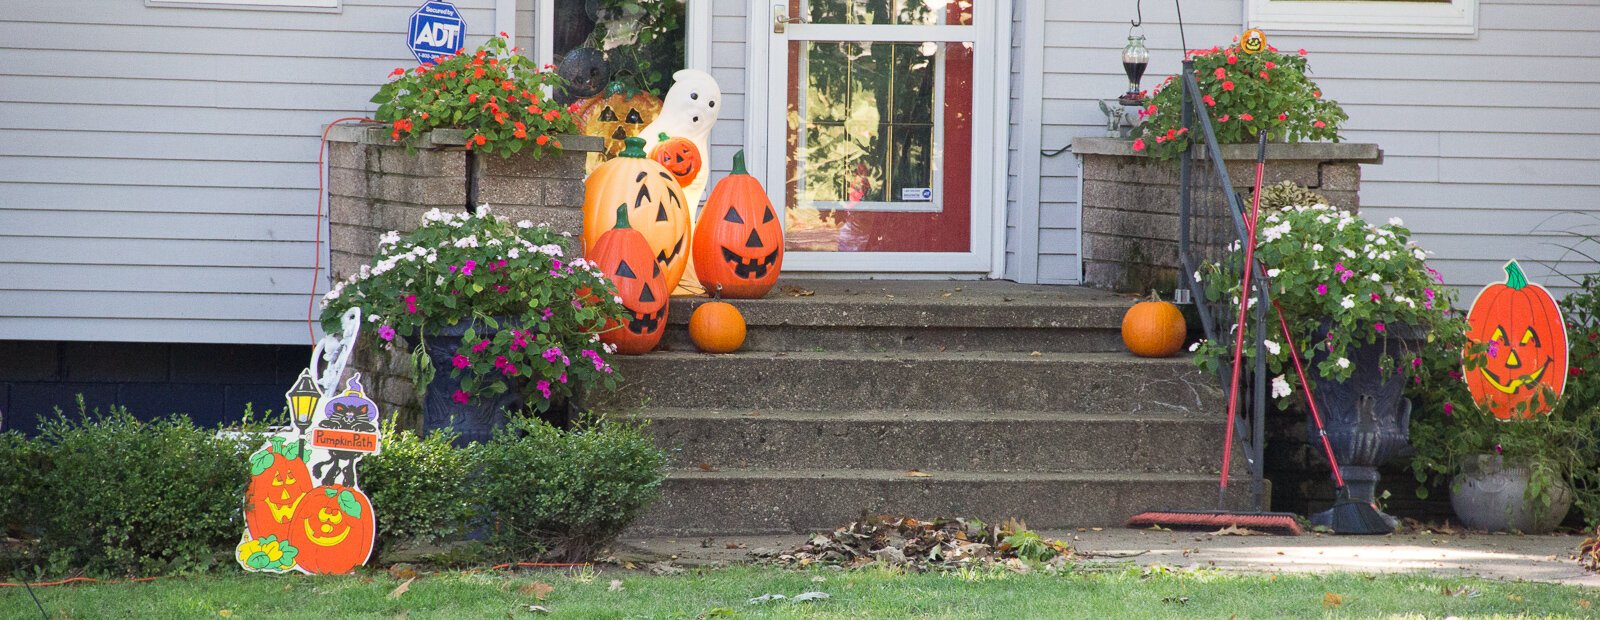 A home in Milwood where they are ready for Halloween